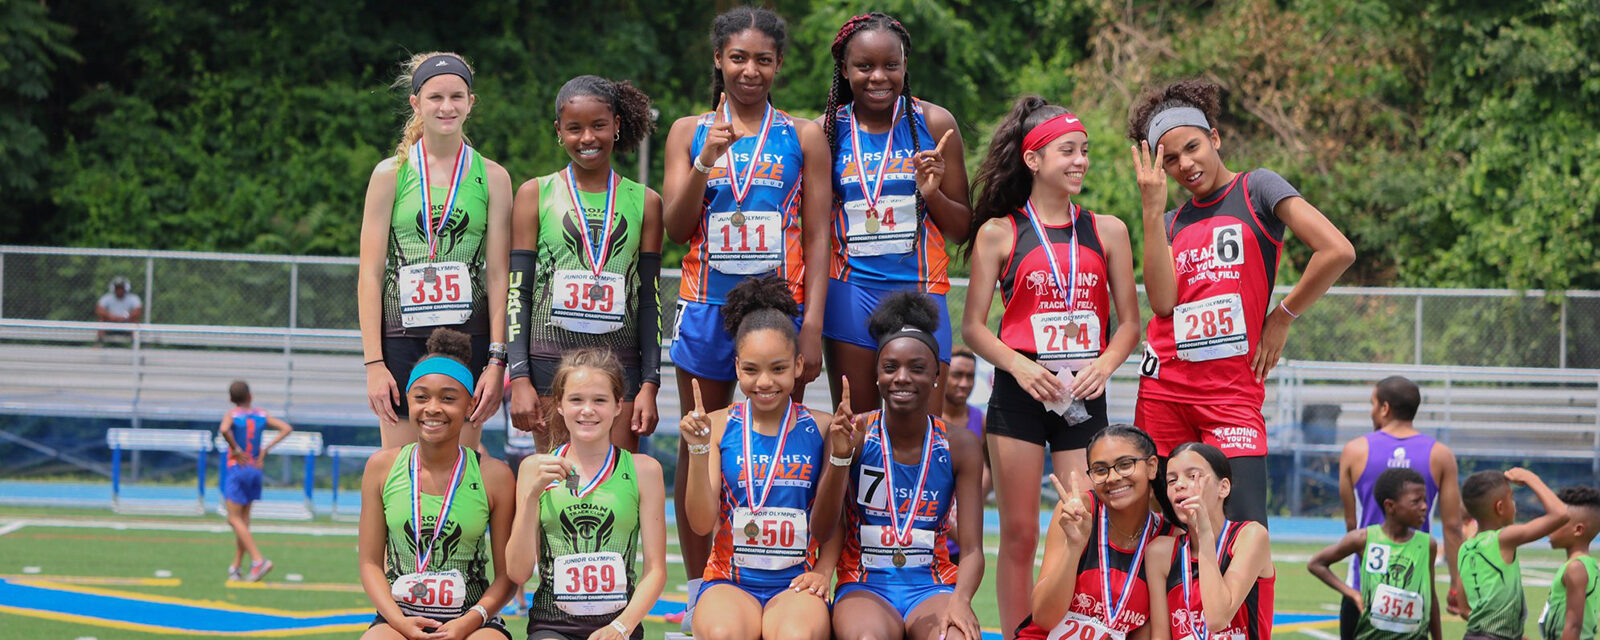 ANNOUNCEMENT OF 2023 MID-ATLANTIC ASSOCIATION’S JUNIOR OLYMPICS TRACK & FIELD CHAMPIONSHIPS MEET DATE AND TIME